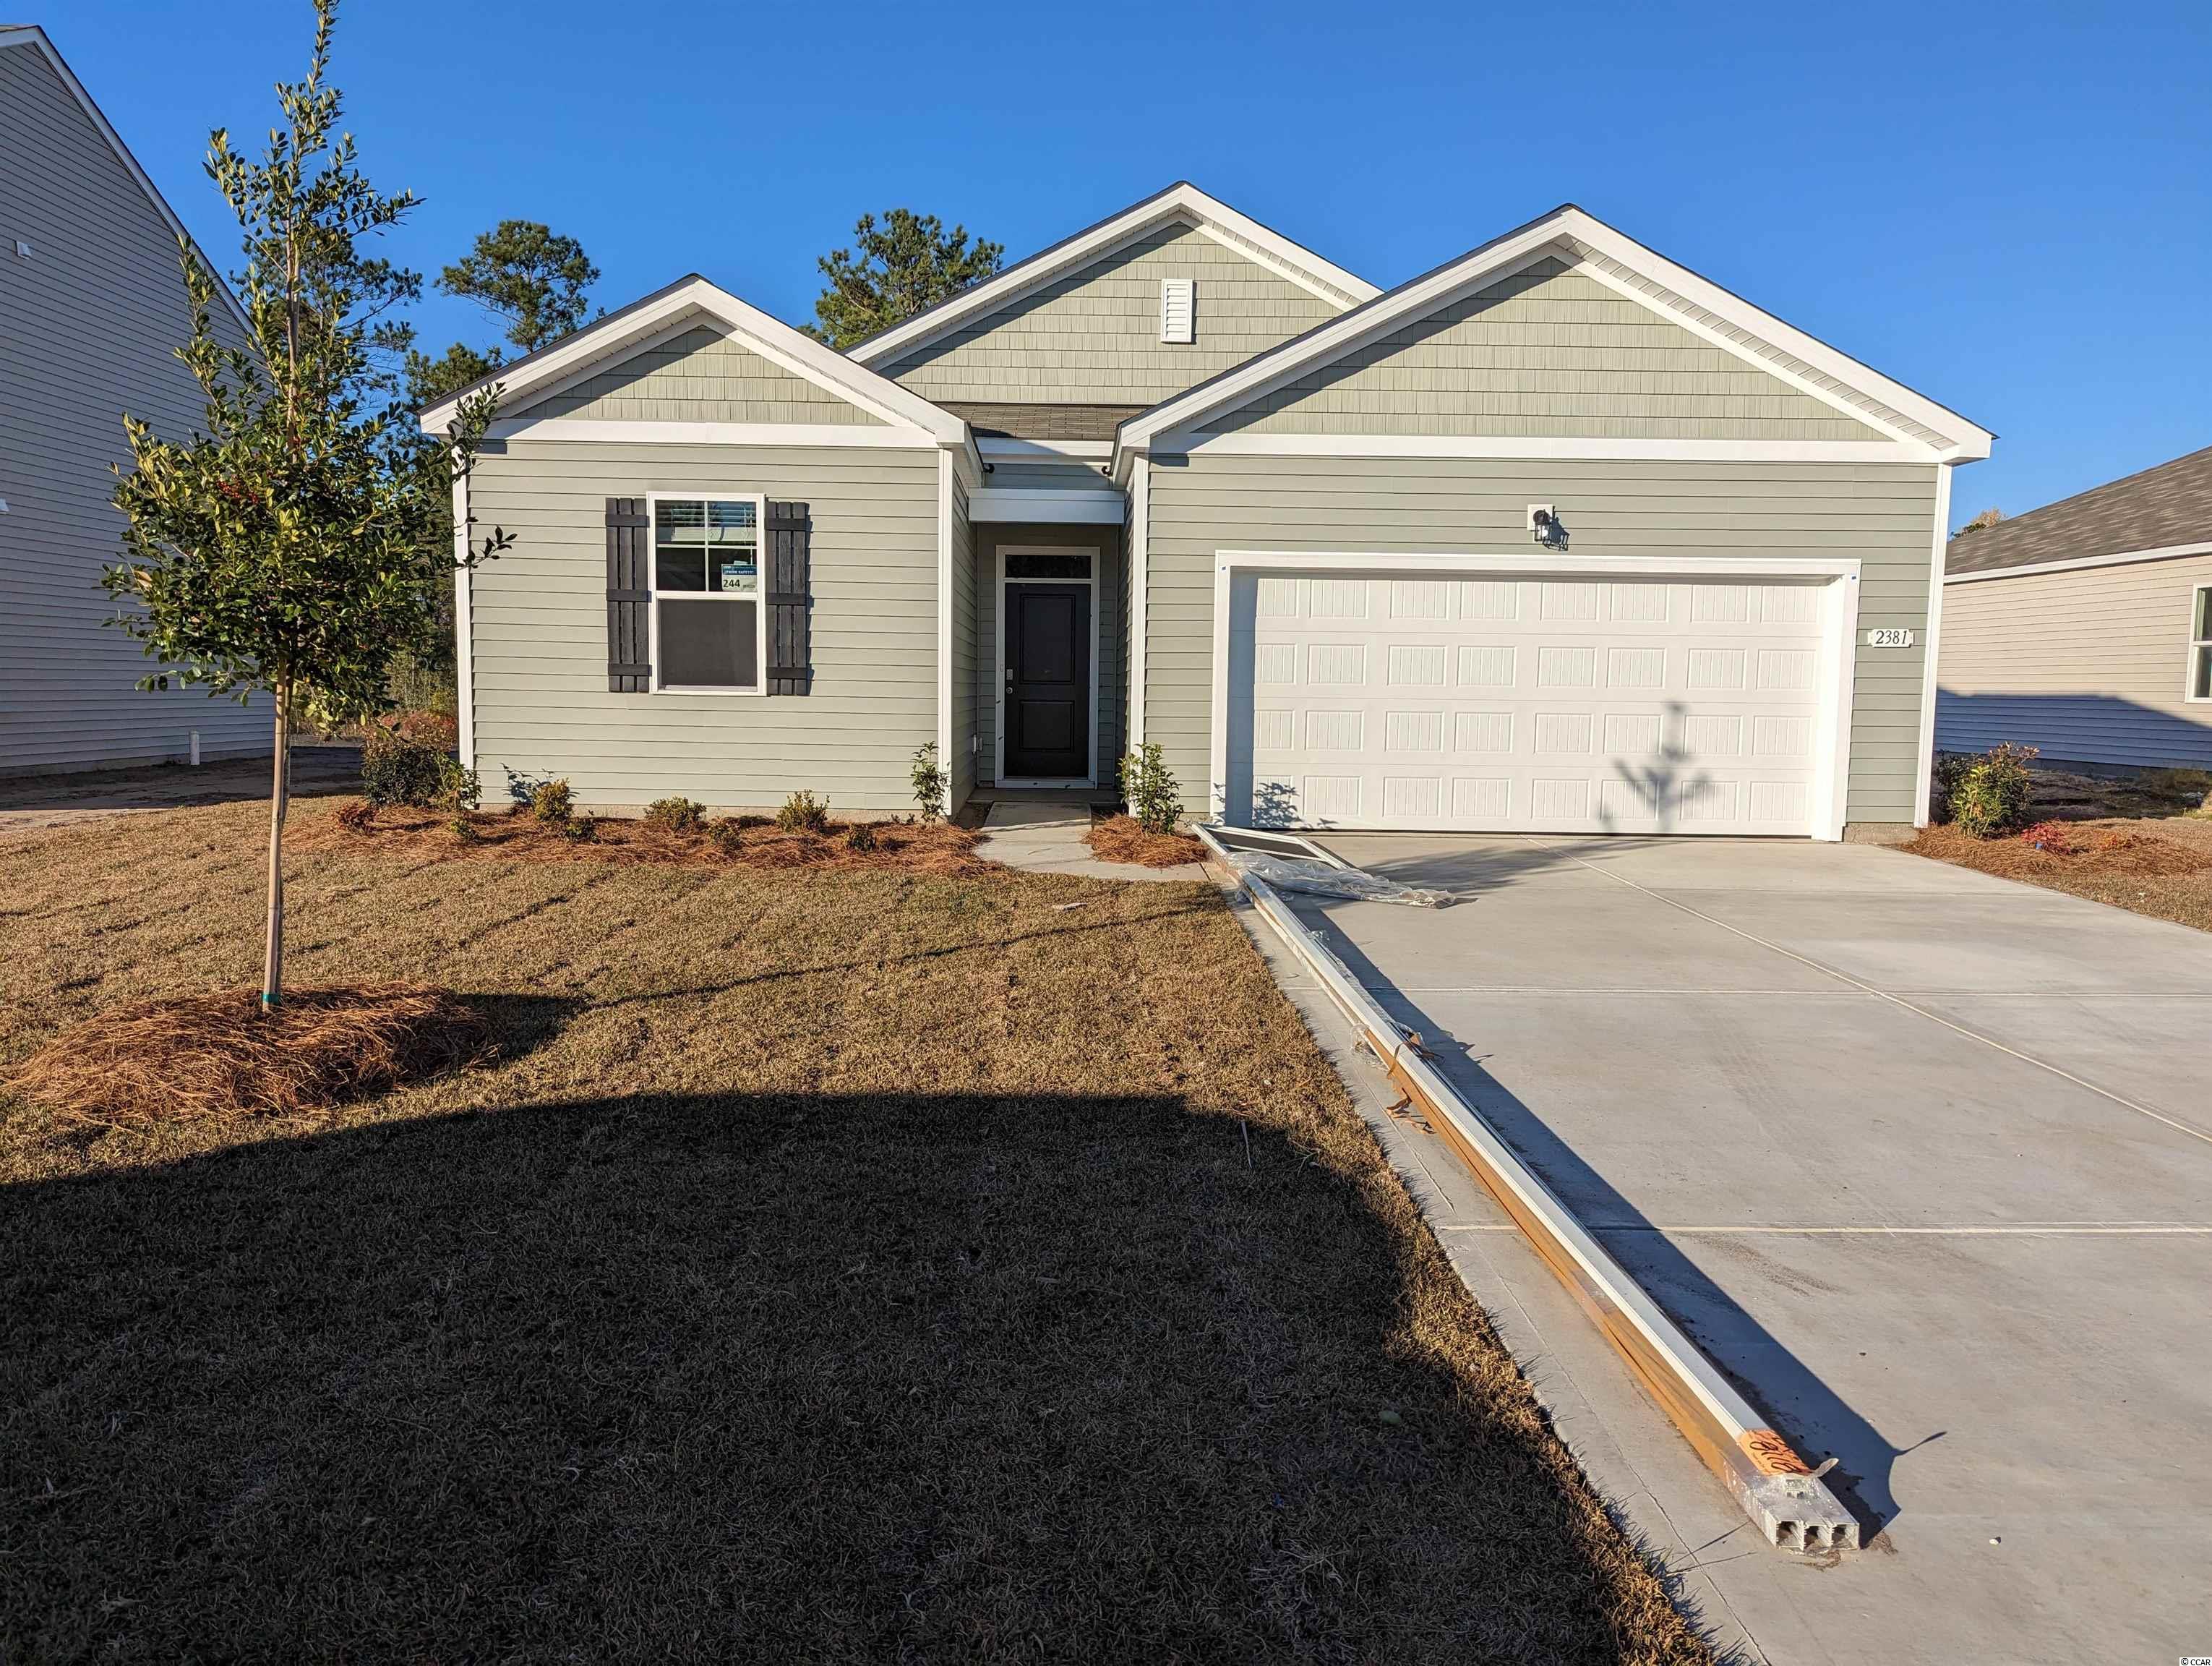 2381 Blackthorn Dr. Conway, SC 29526